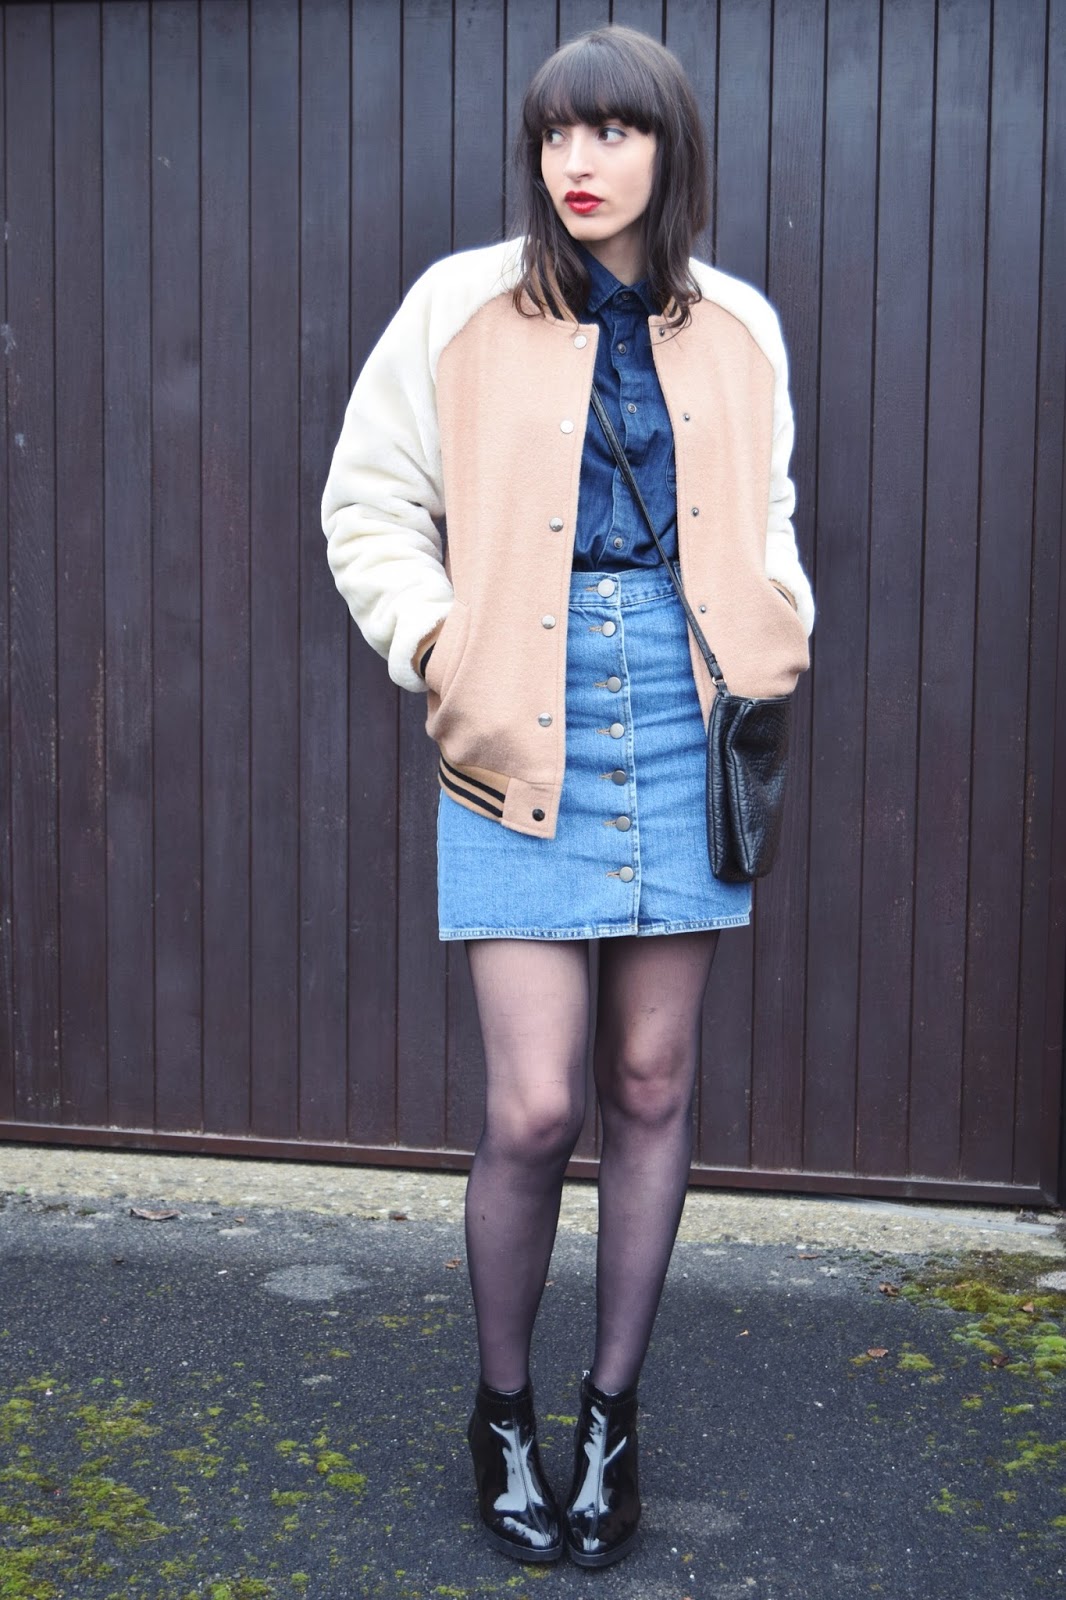 How to Style Your Denim Skirt - Fashionmylegs : The tights and hosiery blog